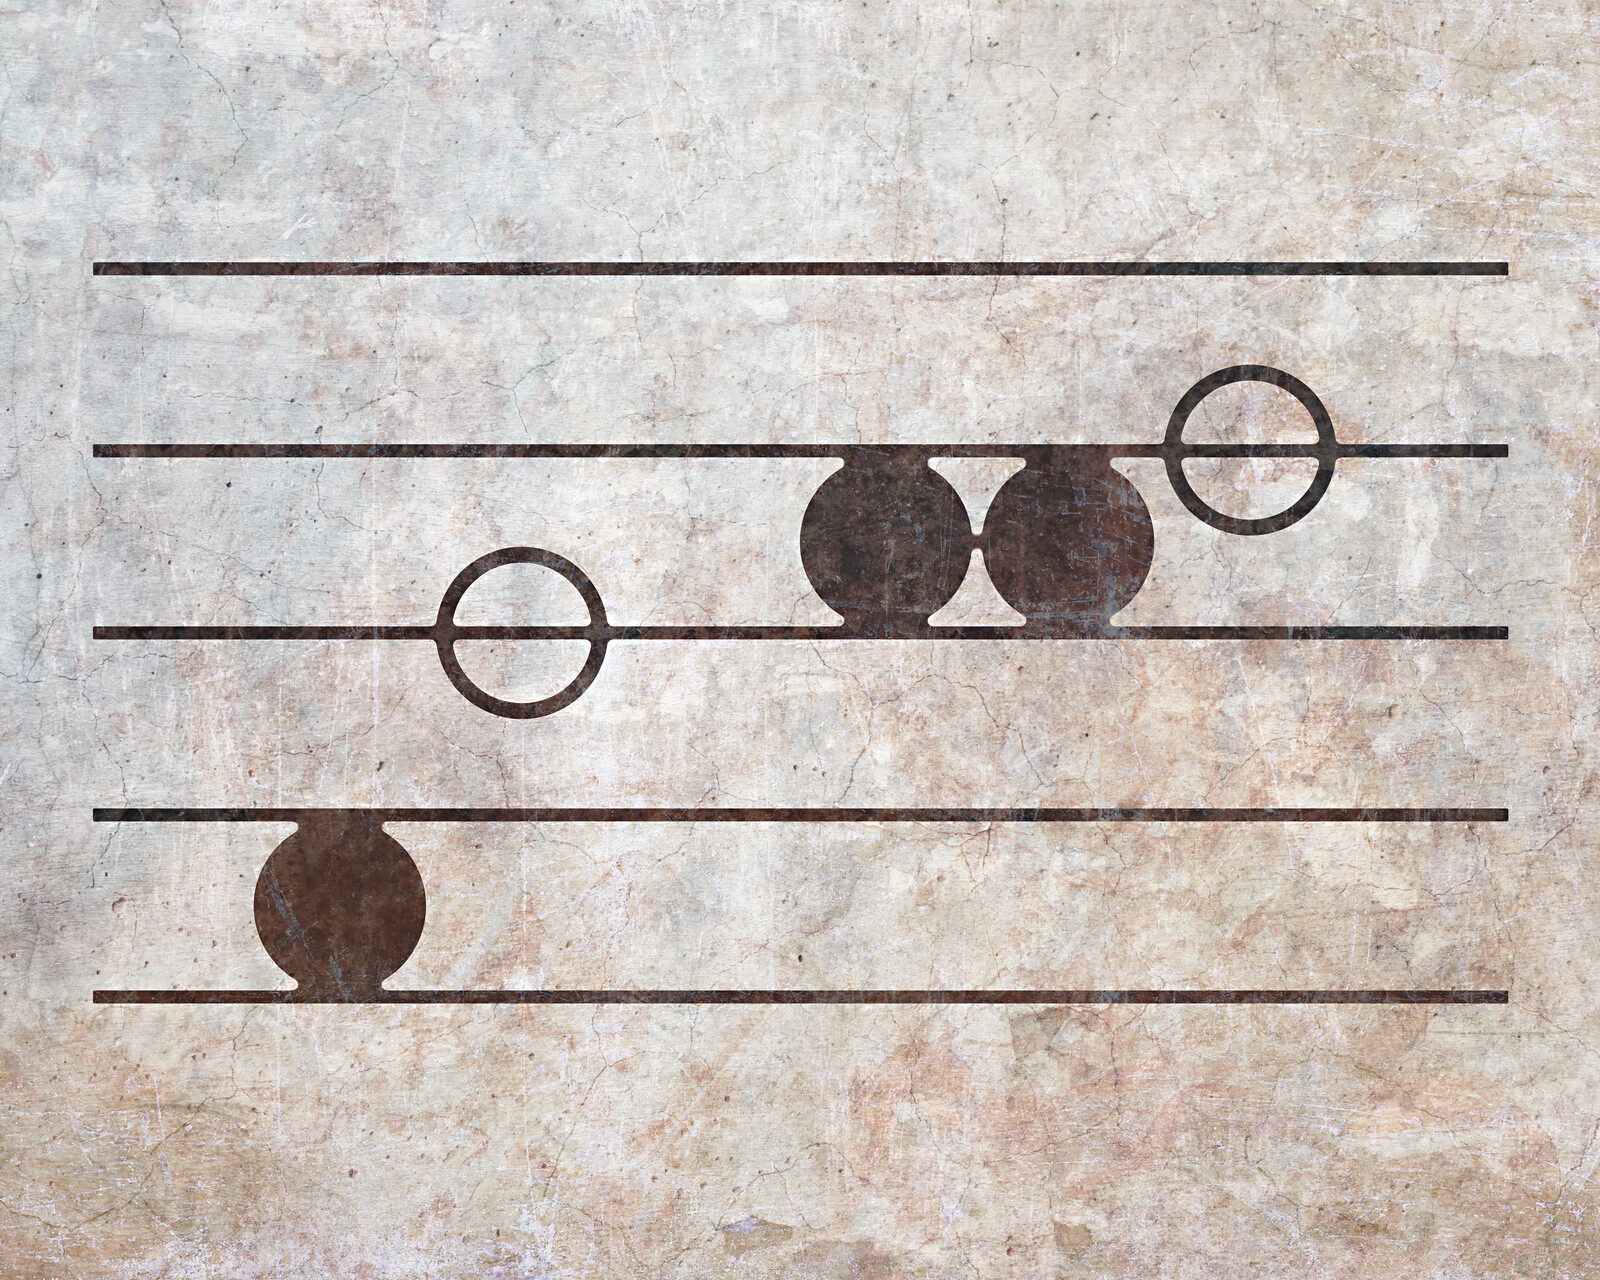 Circles and lines representing the first few measures of “The Spirit of God”